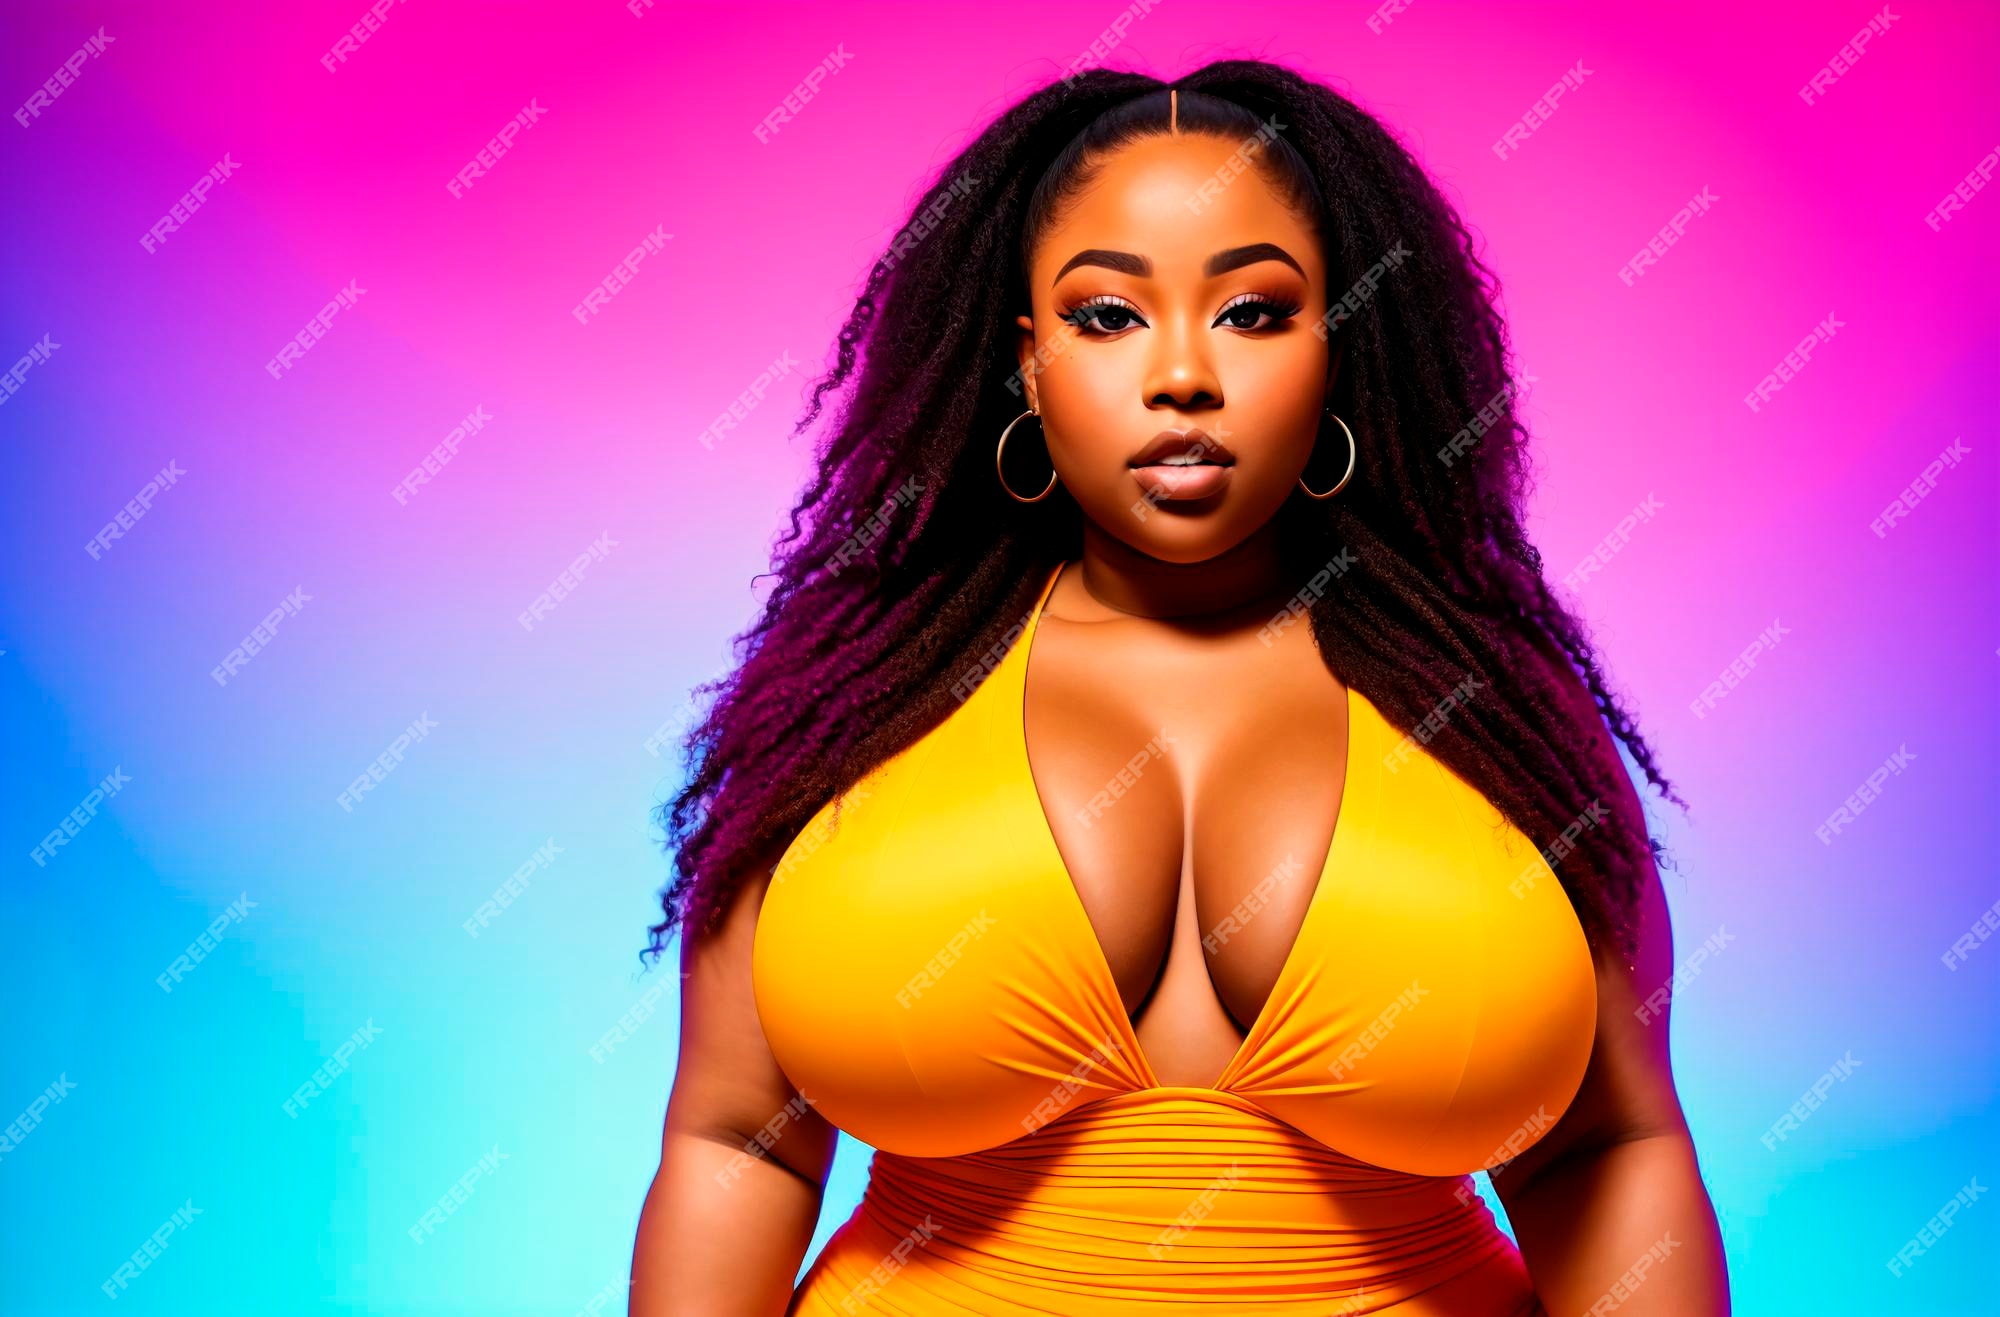 denise jessica recommends fat black girl tits pic